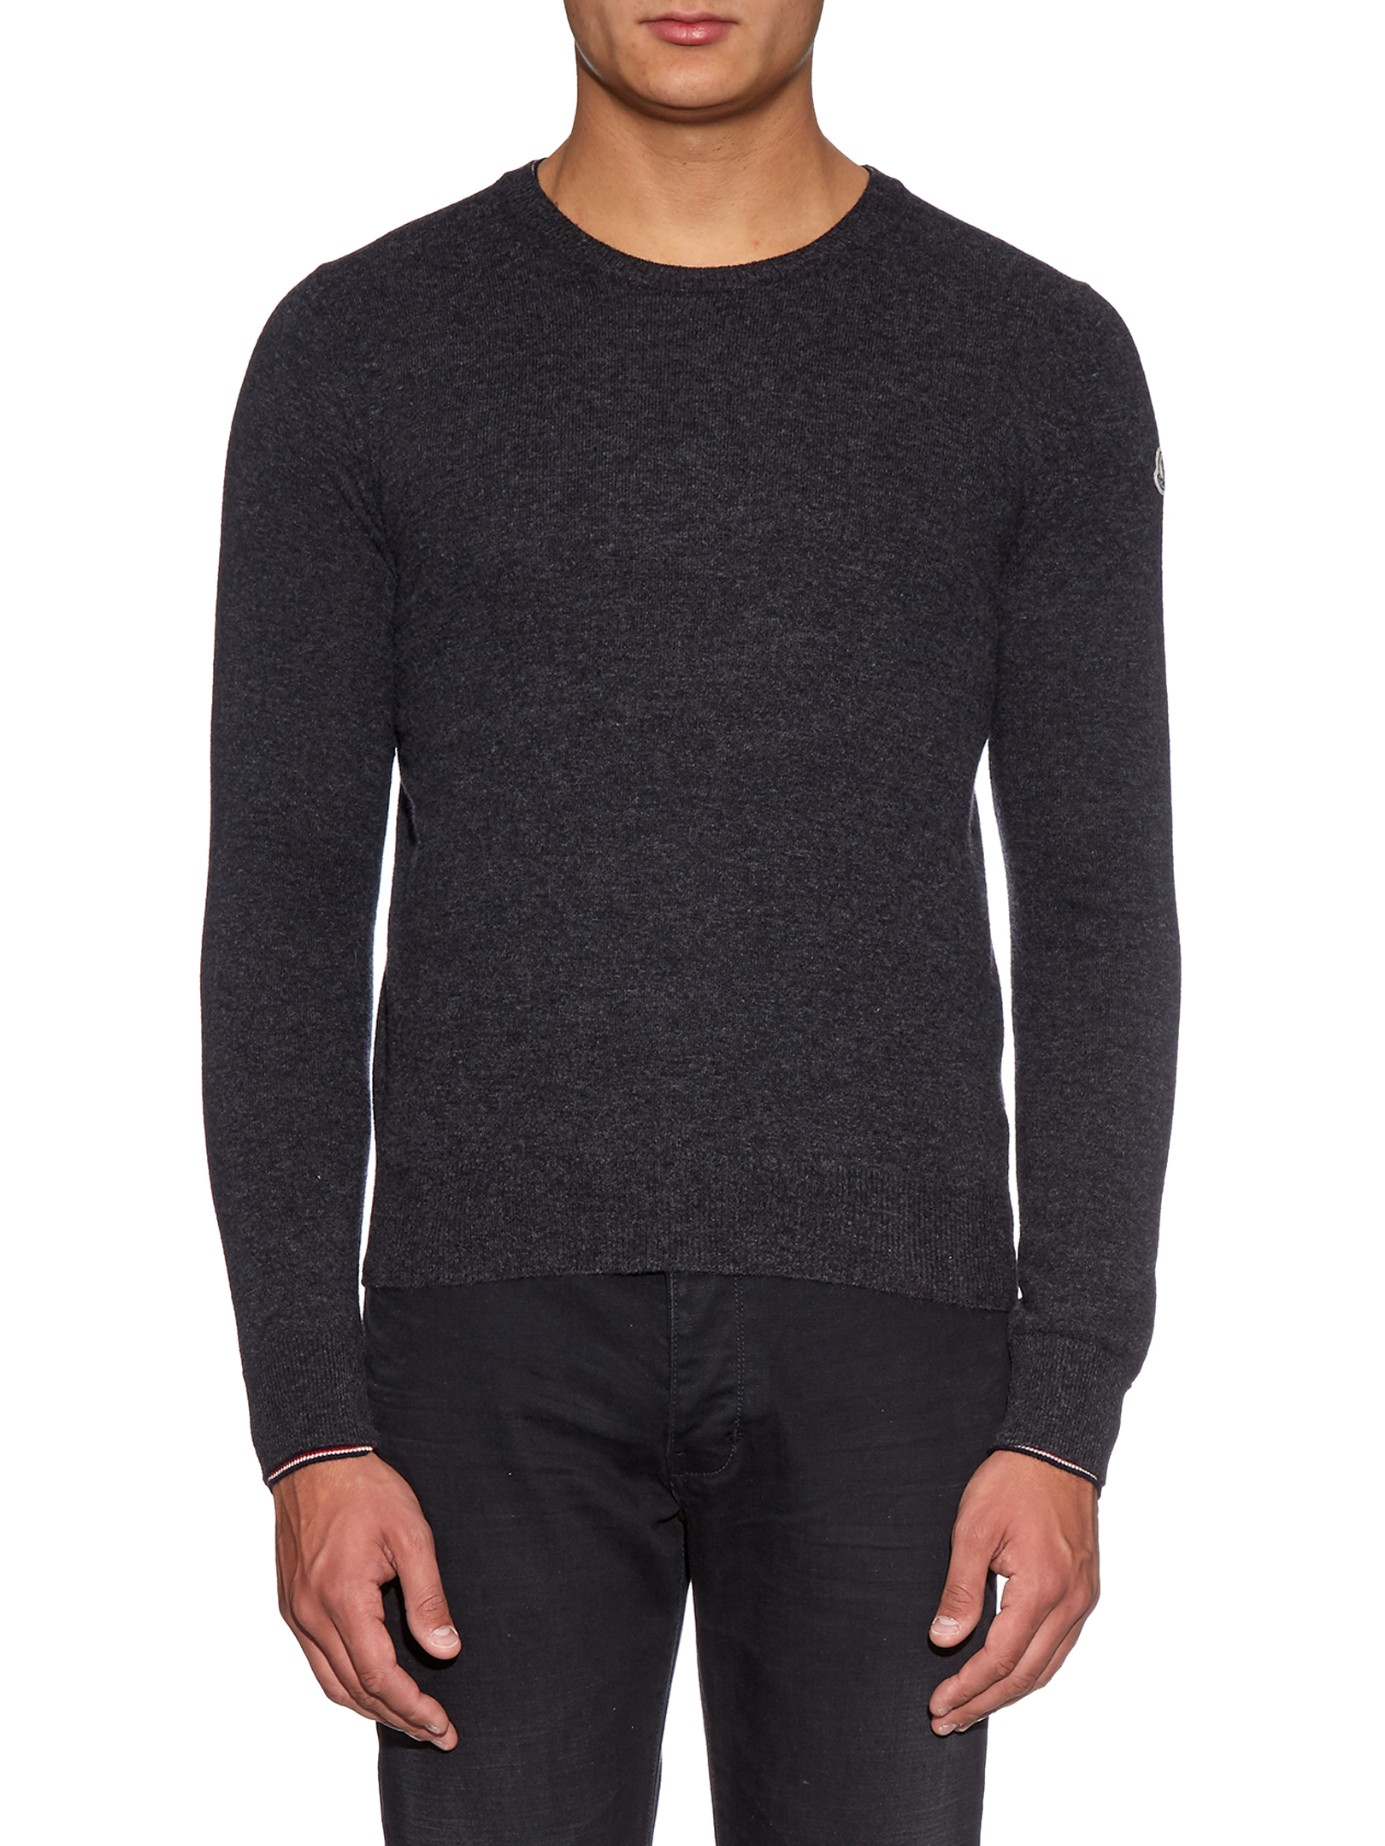 Moncler Crew-neck Wool Sweater in Charcoal (Gray) for Men - Lyst